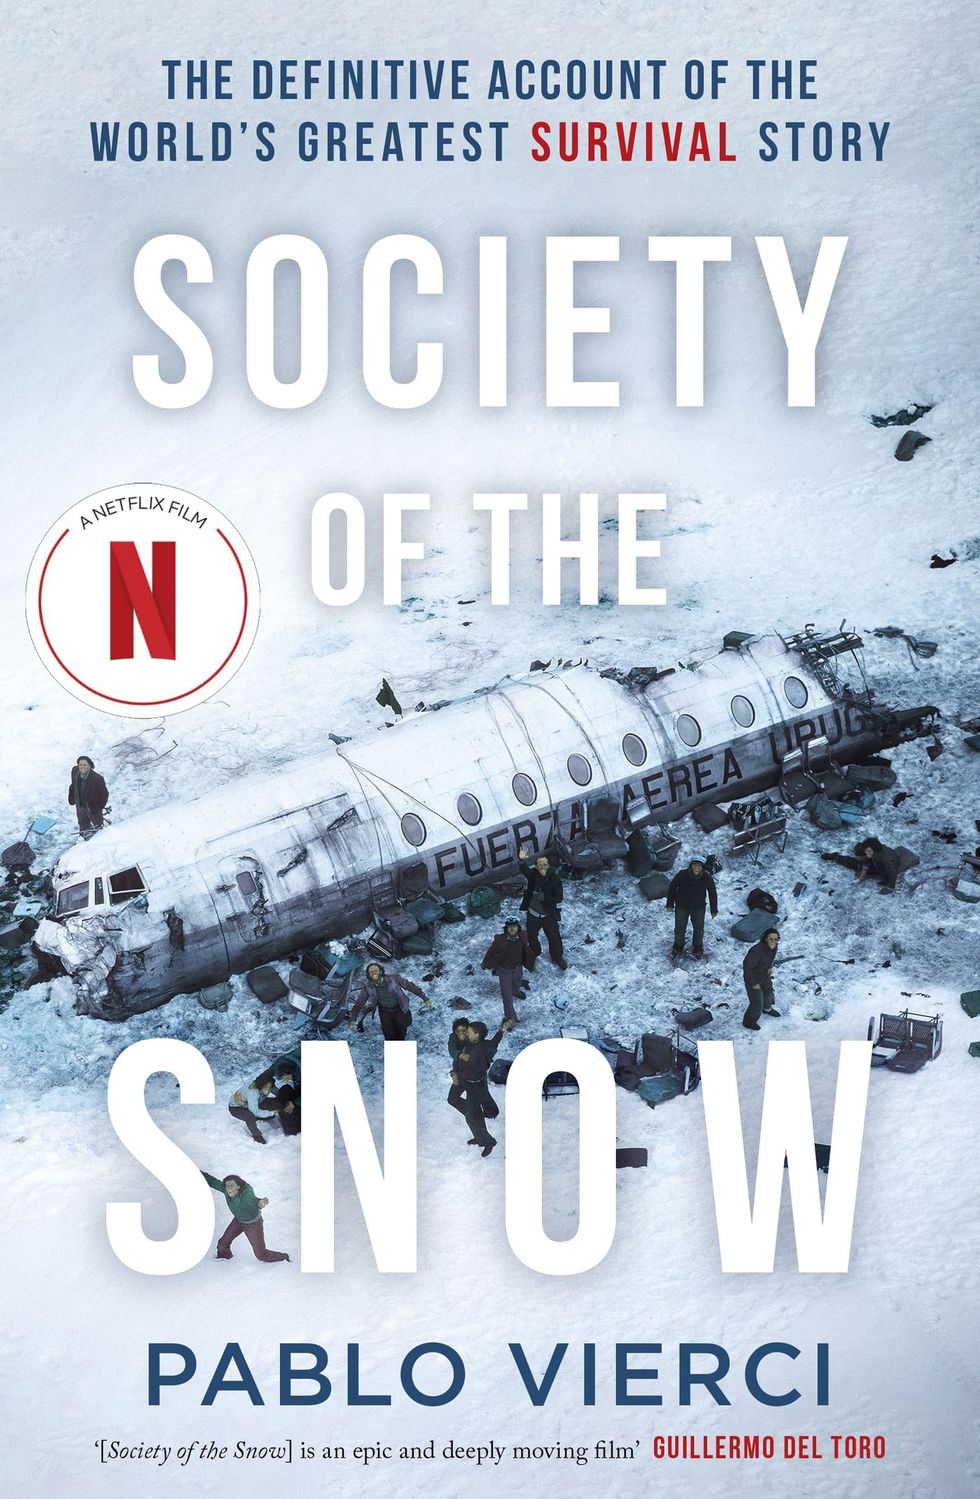 The True Story of 'Society of the Snow' and Flight 571